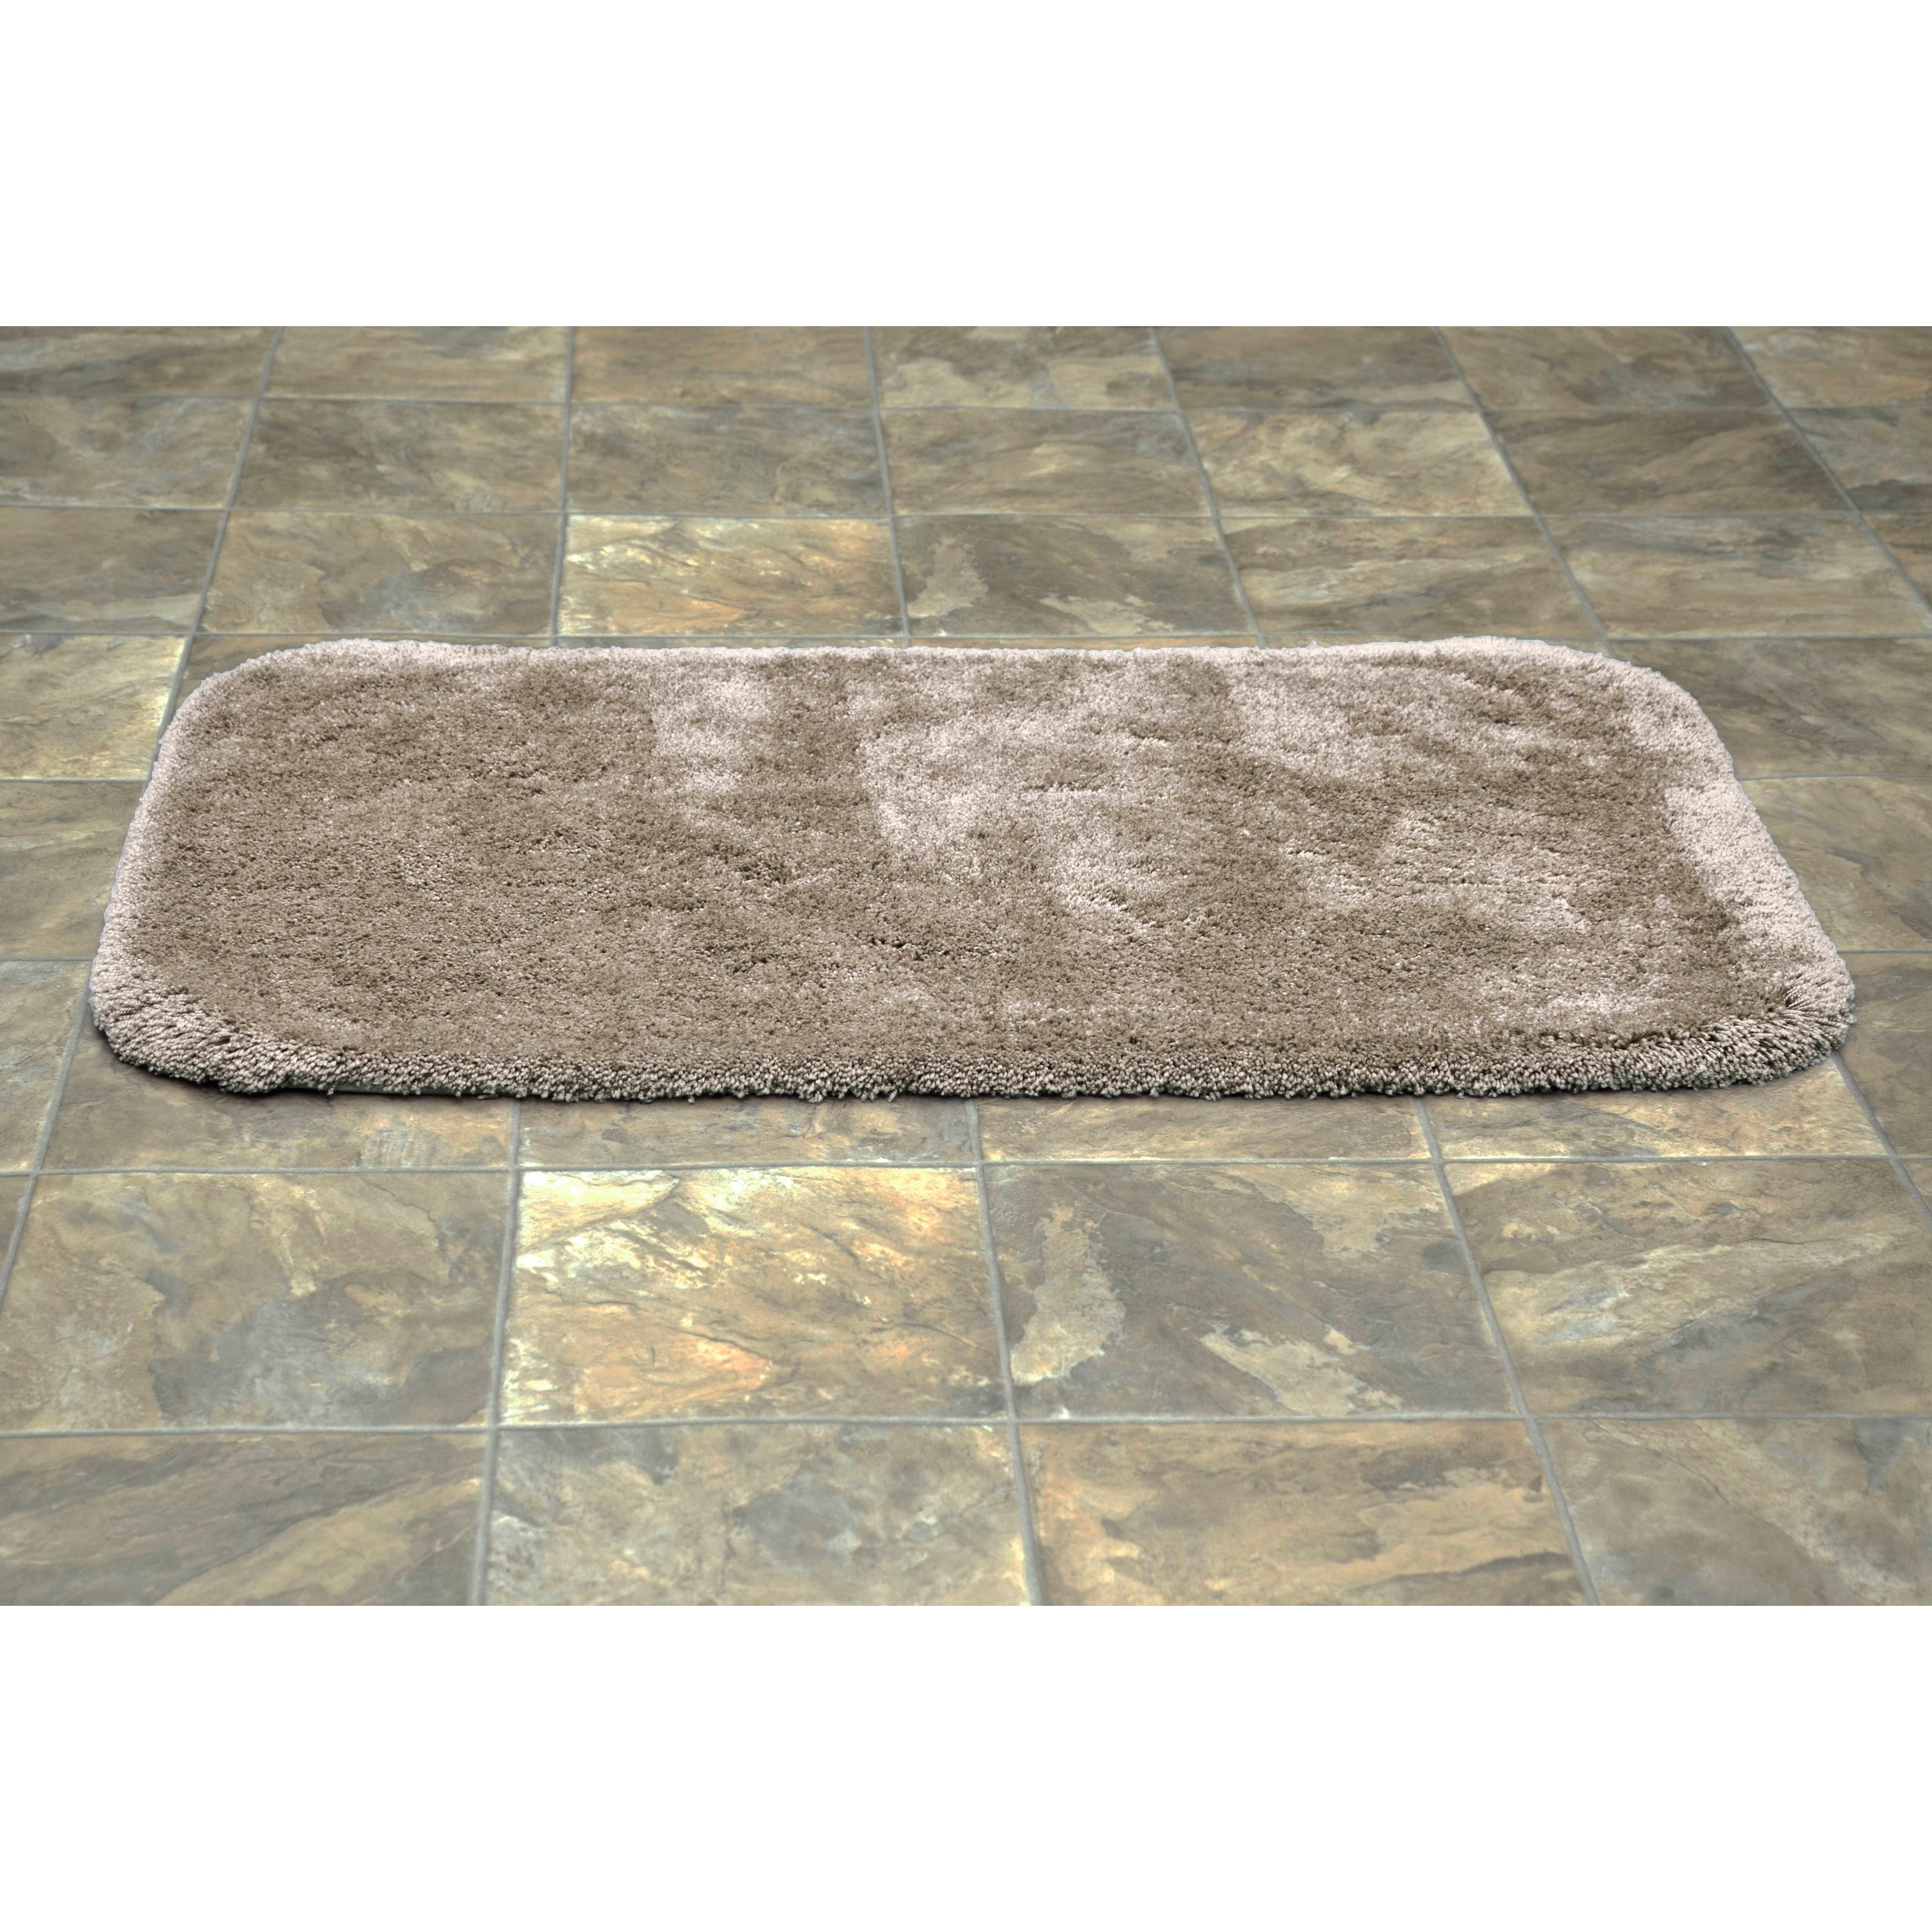 https://ak1.ostkcdn.com/images/products/is/images/direct/76e76fe286bbc6e3cff8ea046d9d75b91a3bc496/Finest-Luxury-Taupe-Ultra-Plush-Washable-Bath-Rug-Runner.jpg